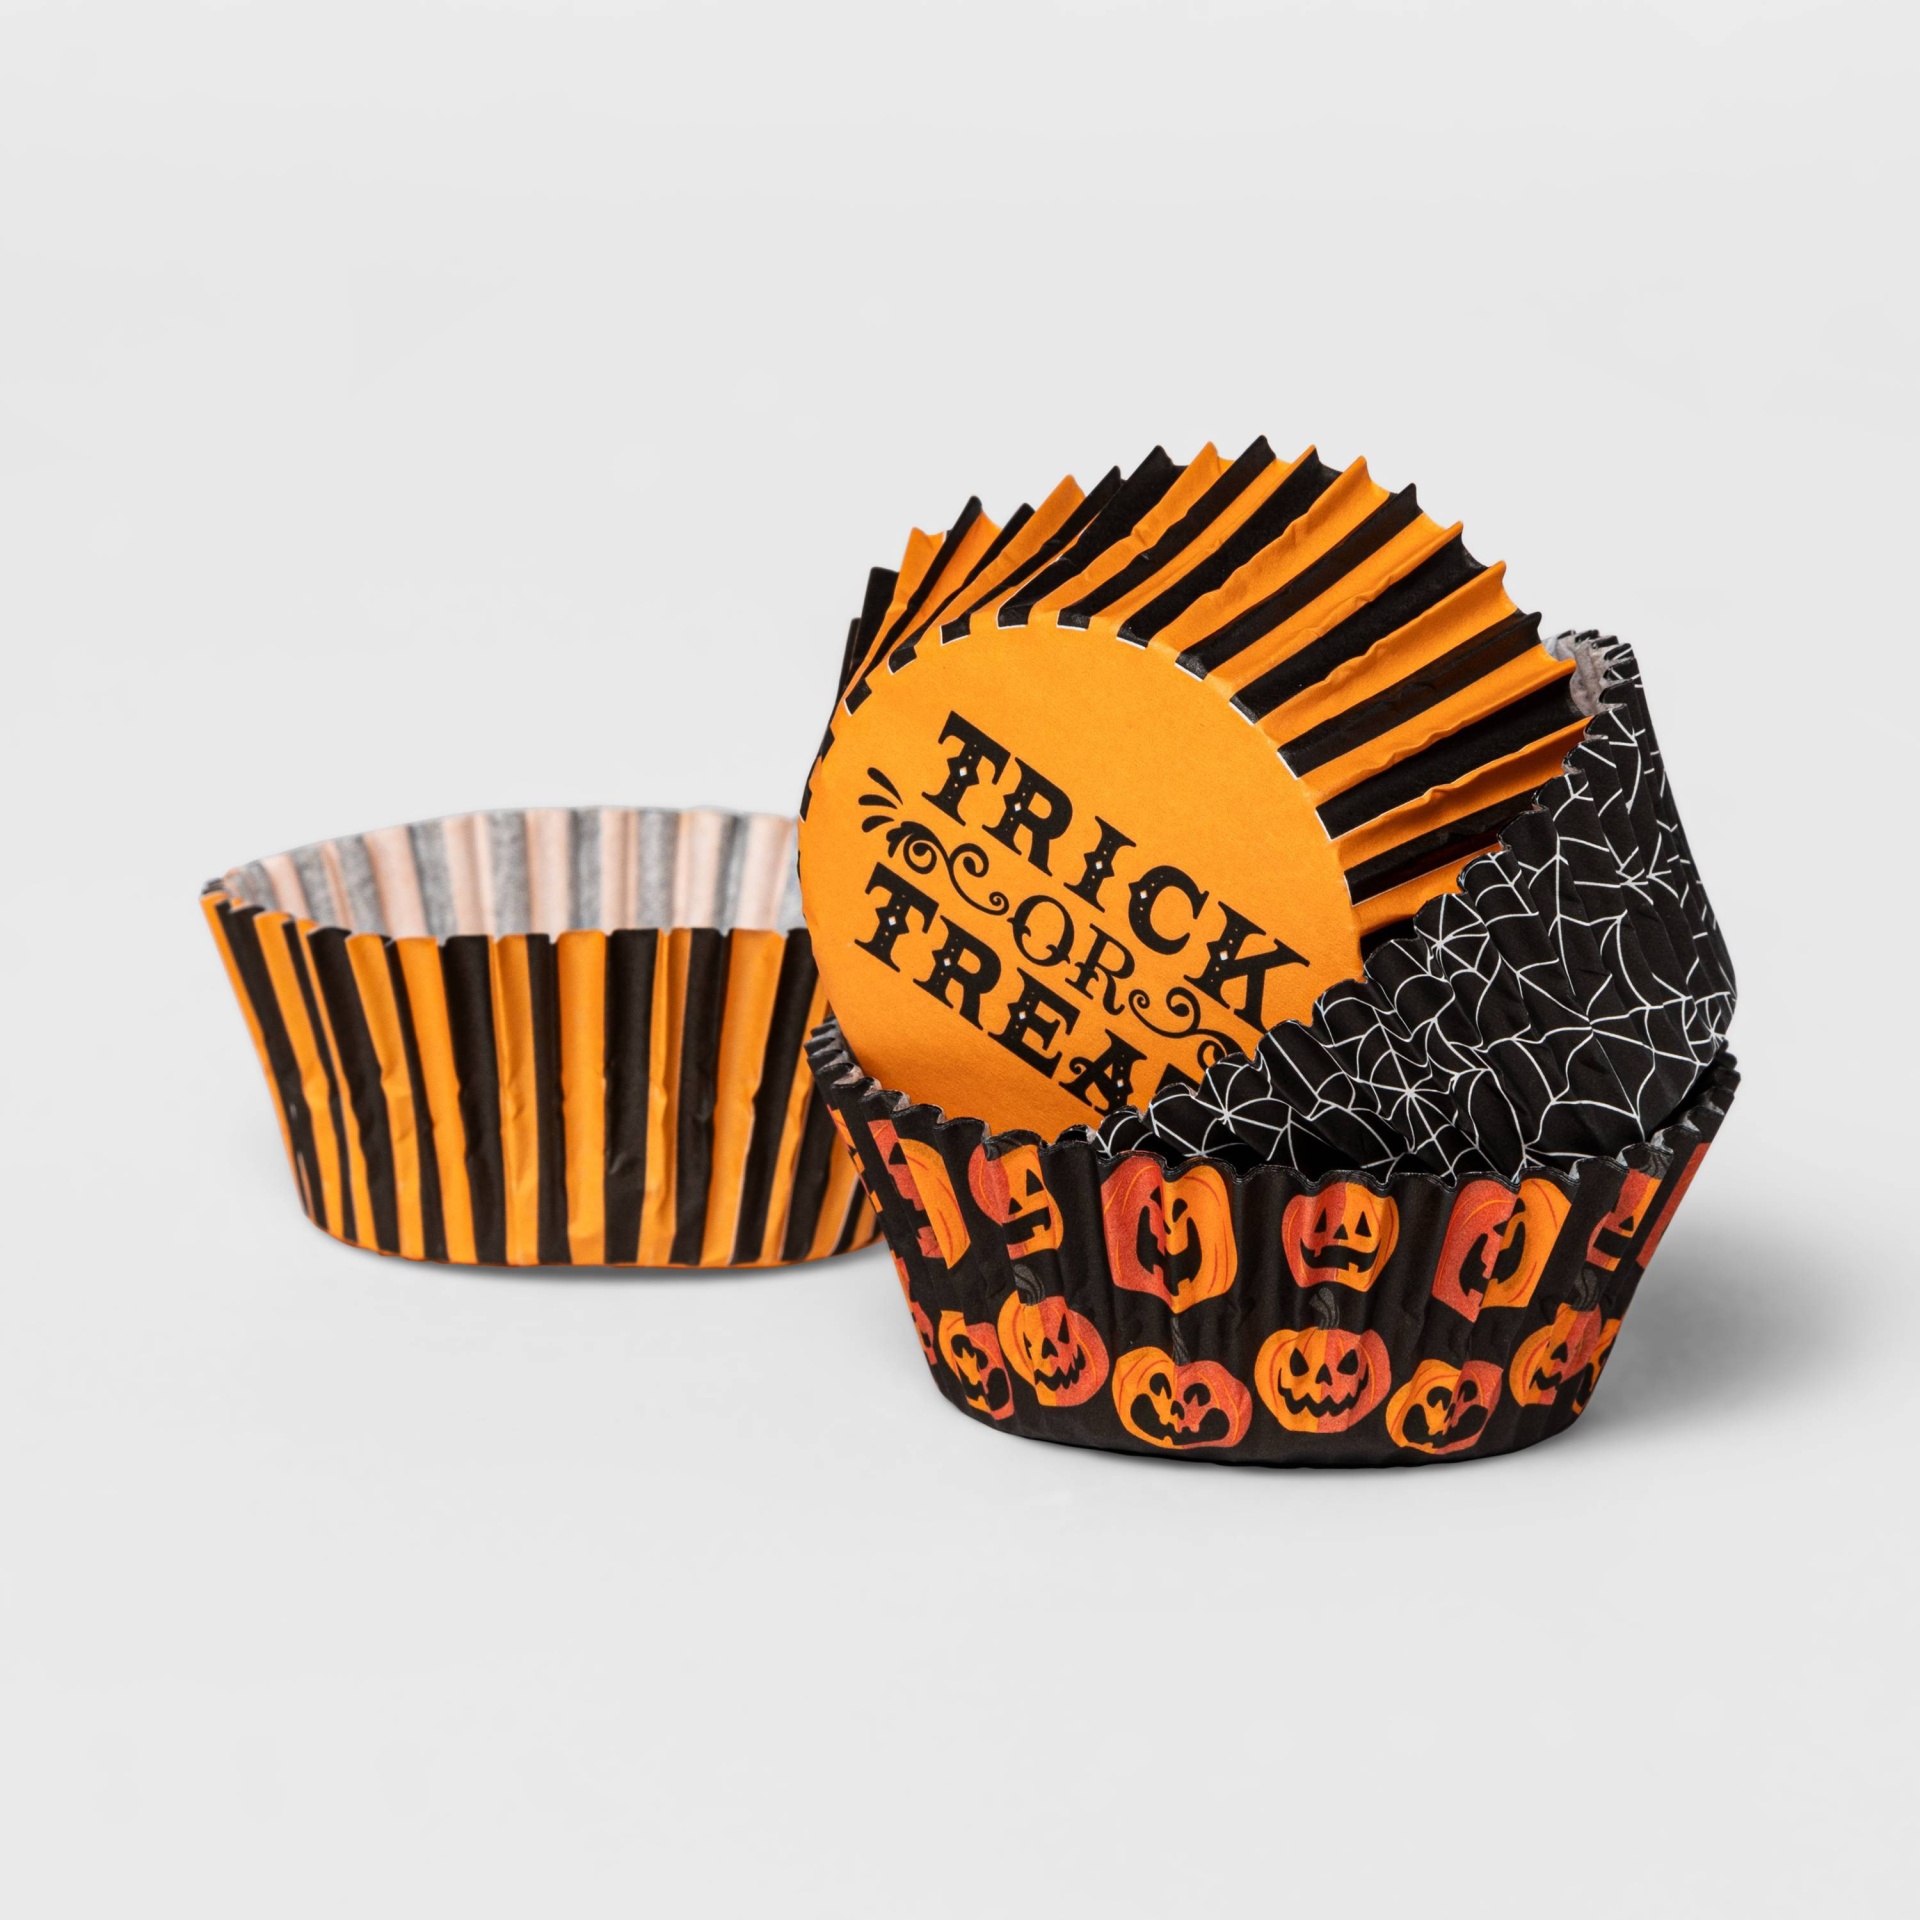 Black Baking Cups 75ct